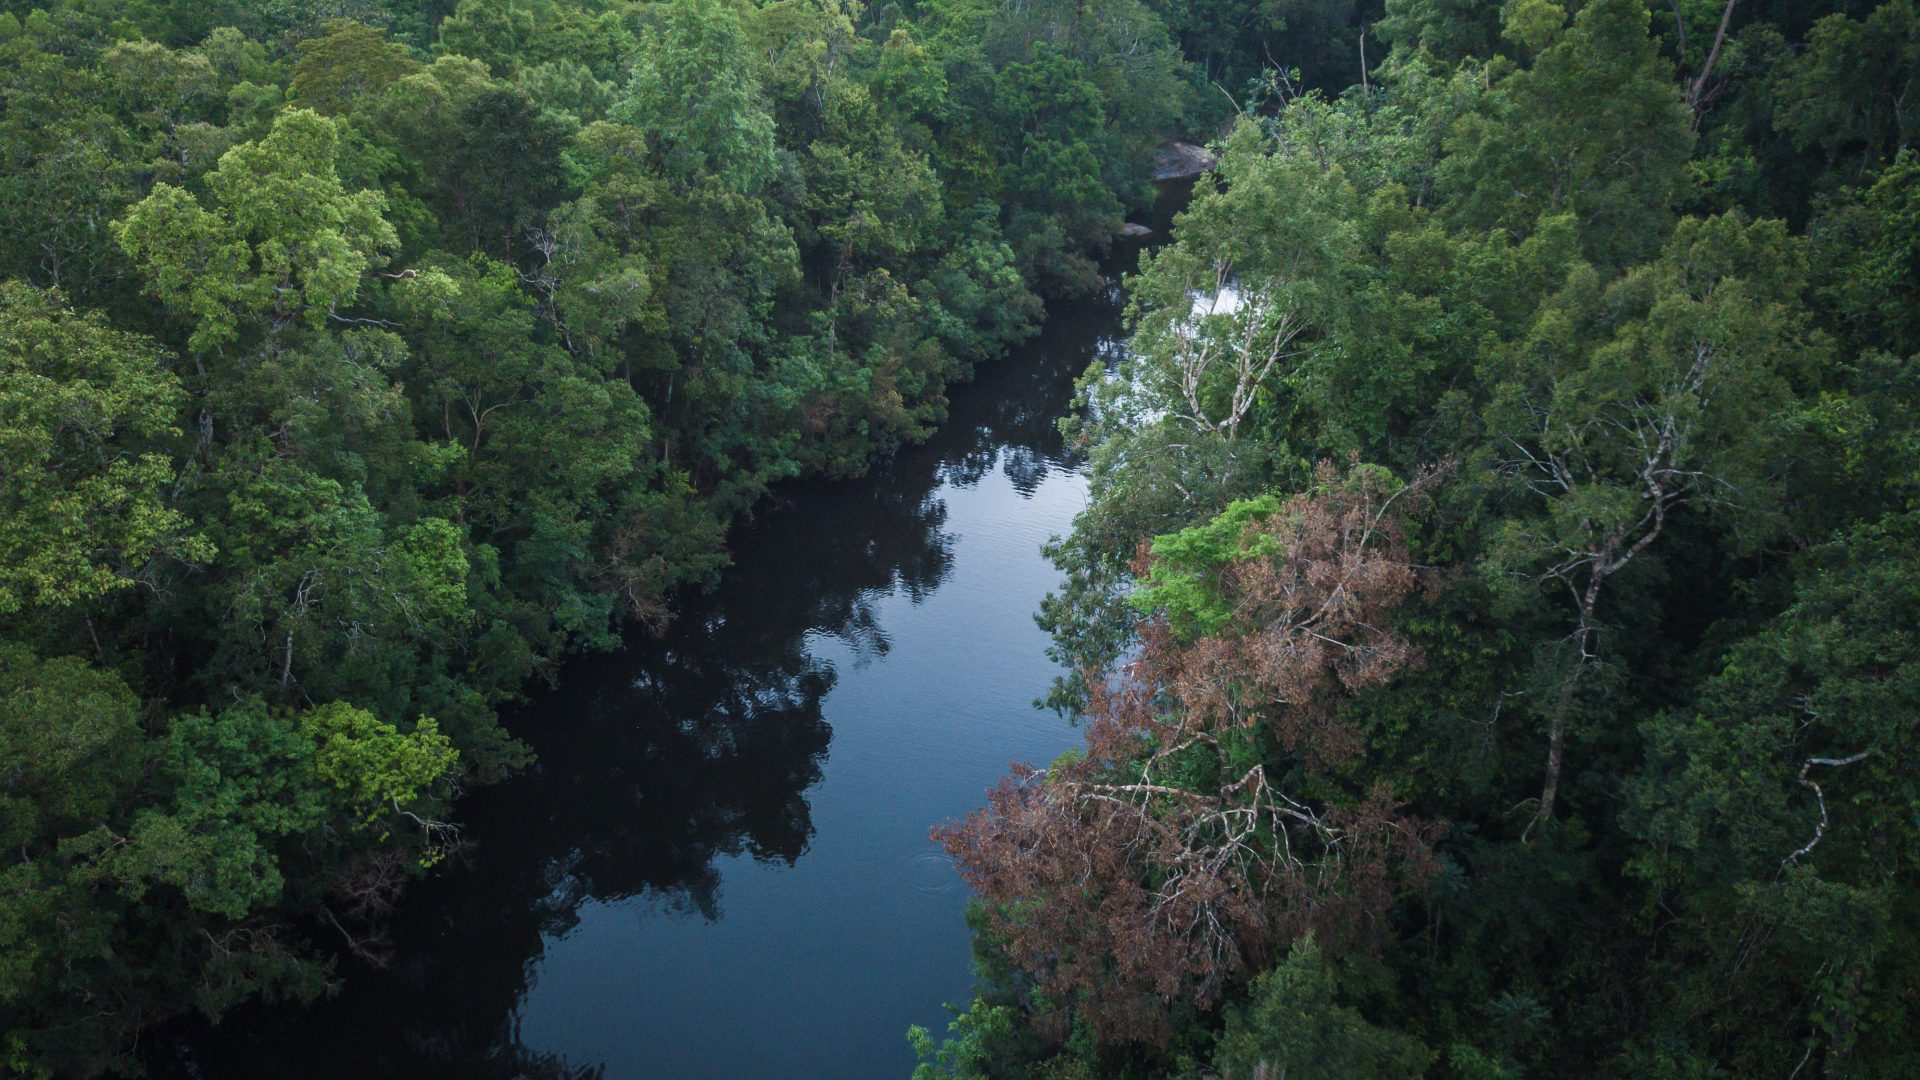 An aeral image taken at a low angle of a river through lush tropical rainforest.